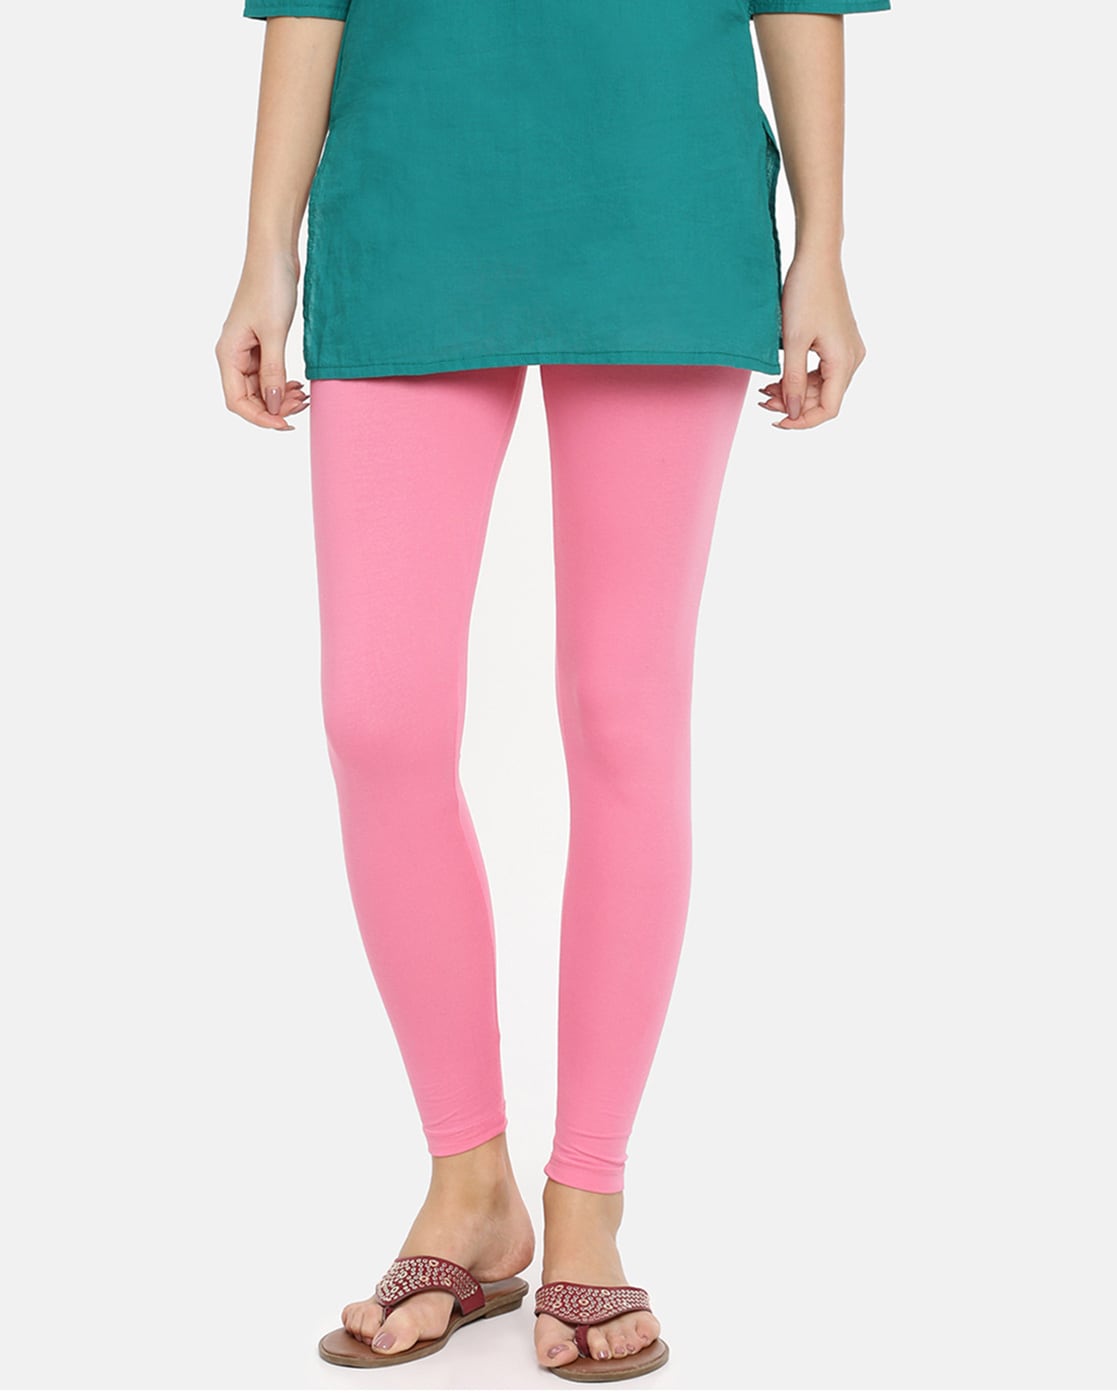 TWIN BIRDS Pink & Green Plain Cropped Leggings - Pack Of 2